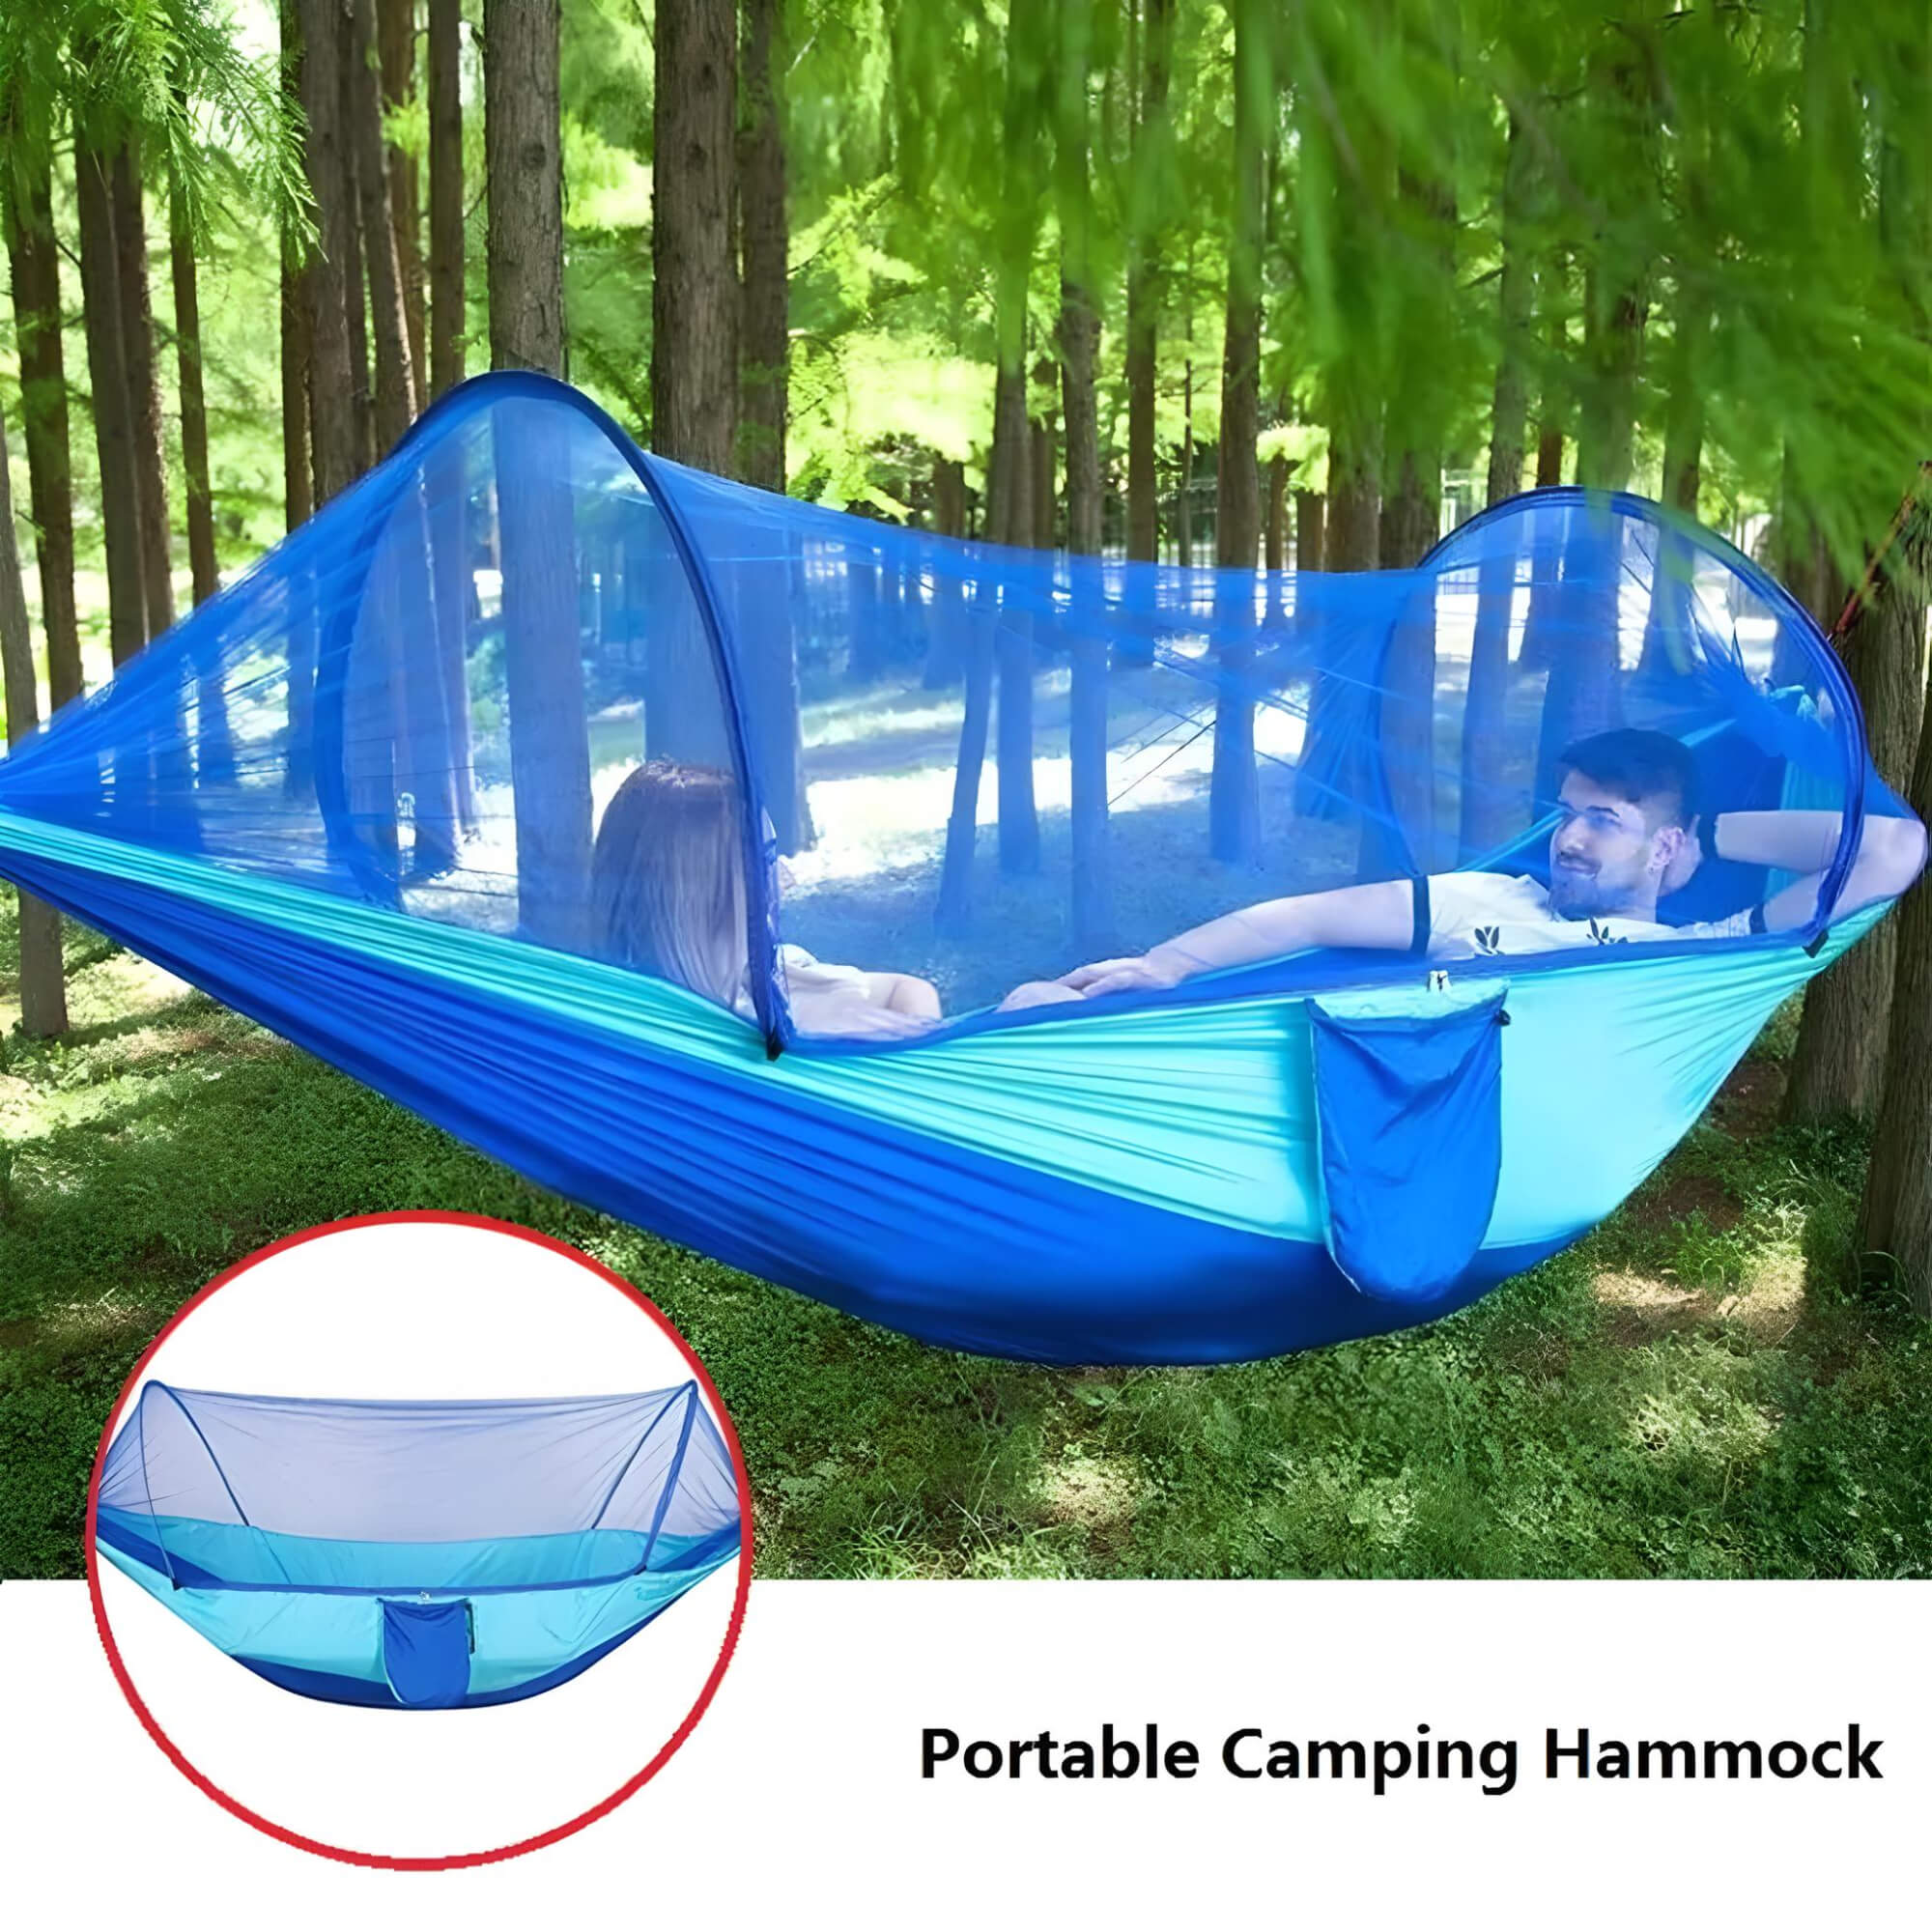 camping-hammock-with-mosquito-net-portable-camping-hammock